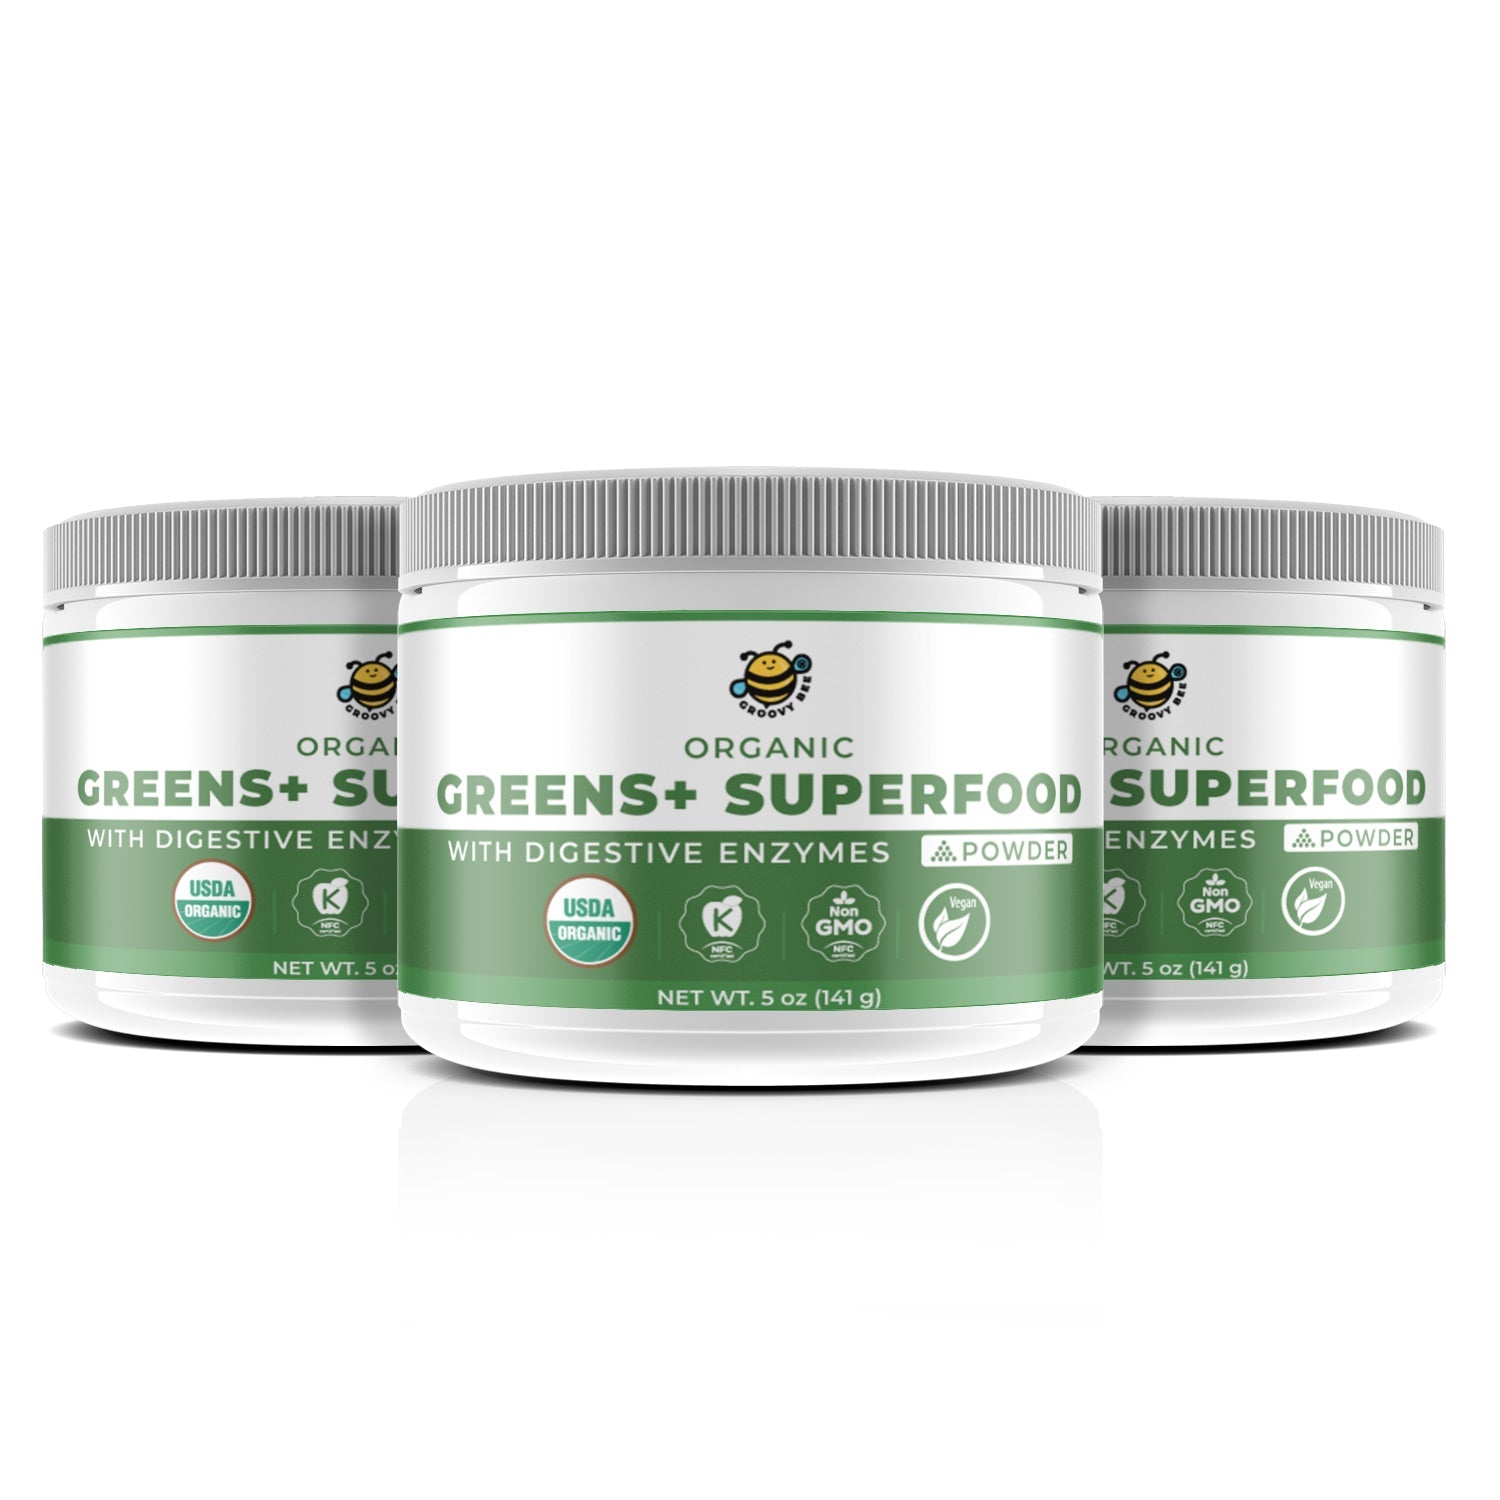 Organic Greens+ Superfood Powder With Digestive Enzymes 5 oz (141 g) (3-Pack)